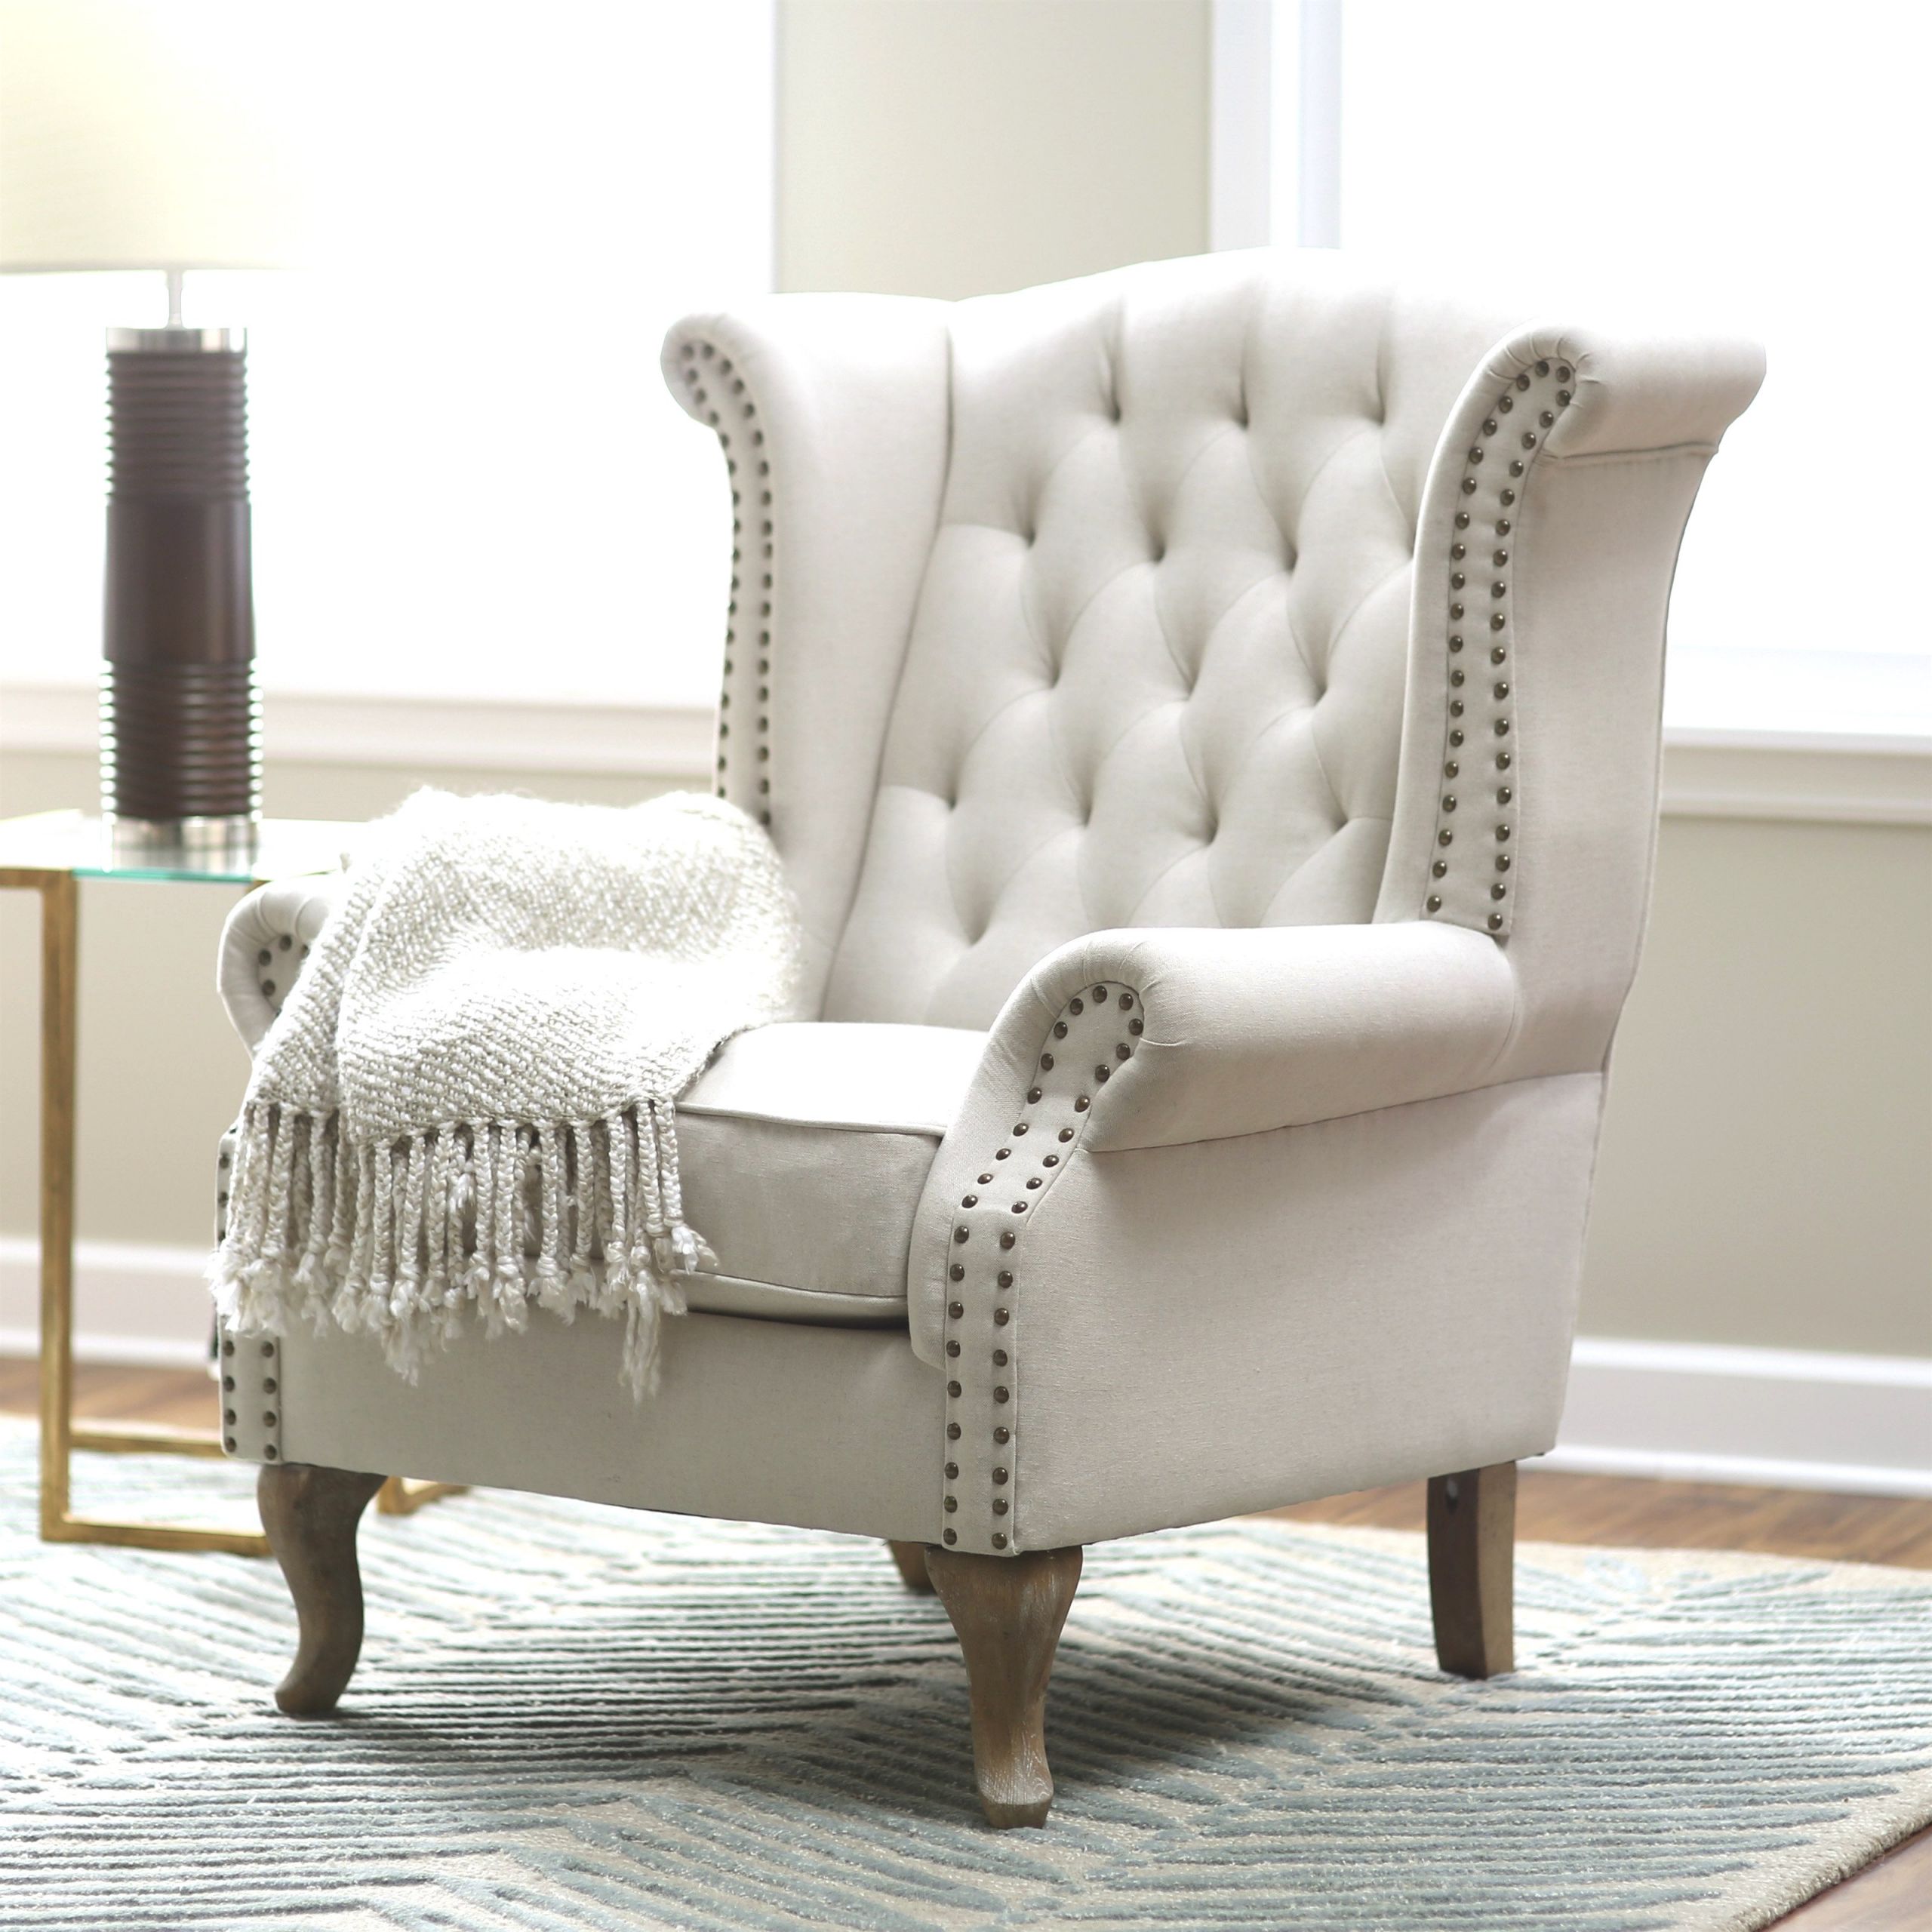 Wingback Living Room Chairs
 Best Living Room Chairs Types With